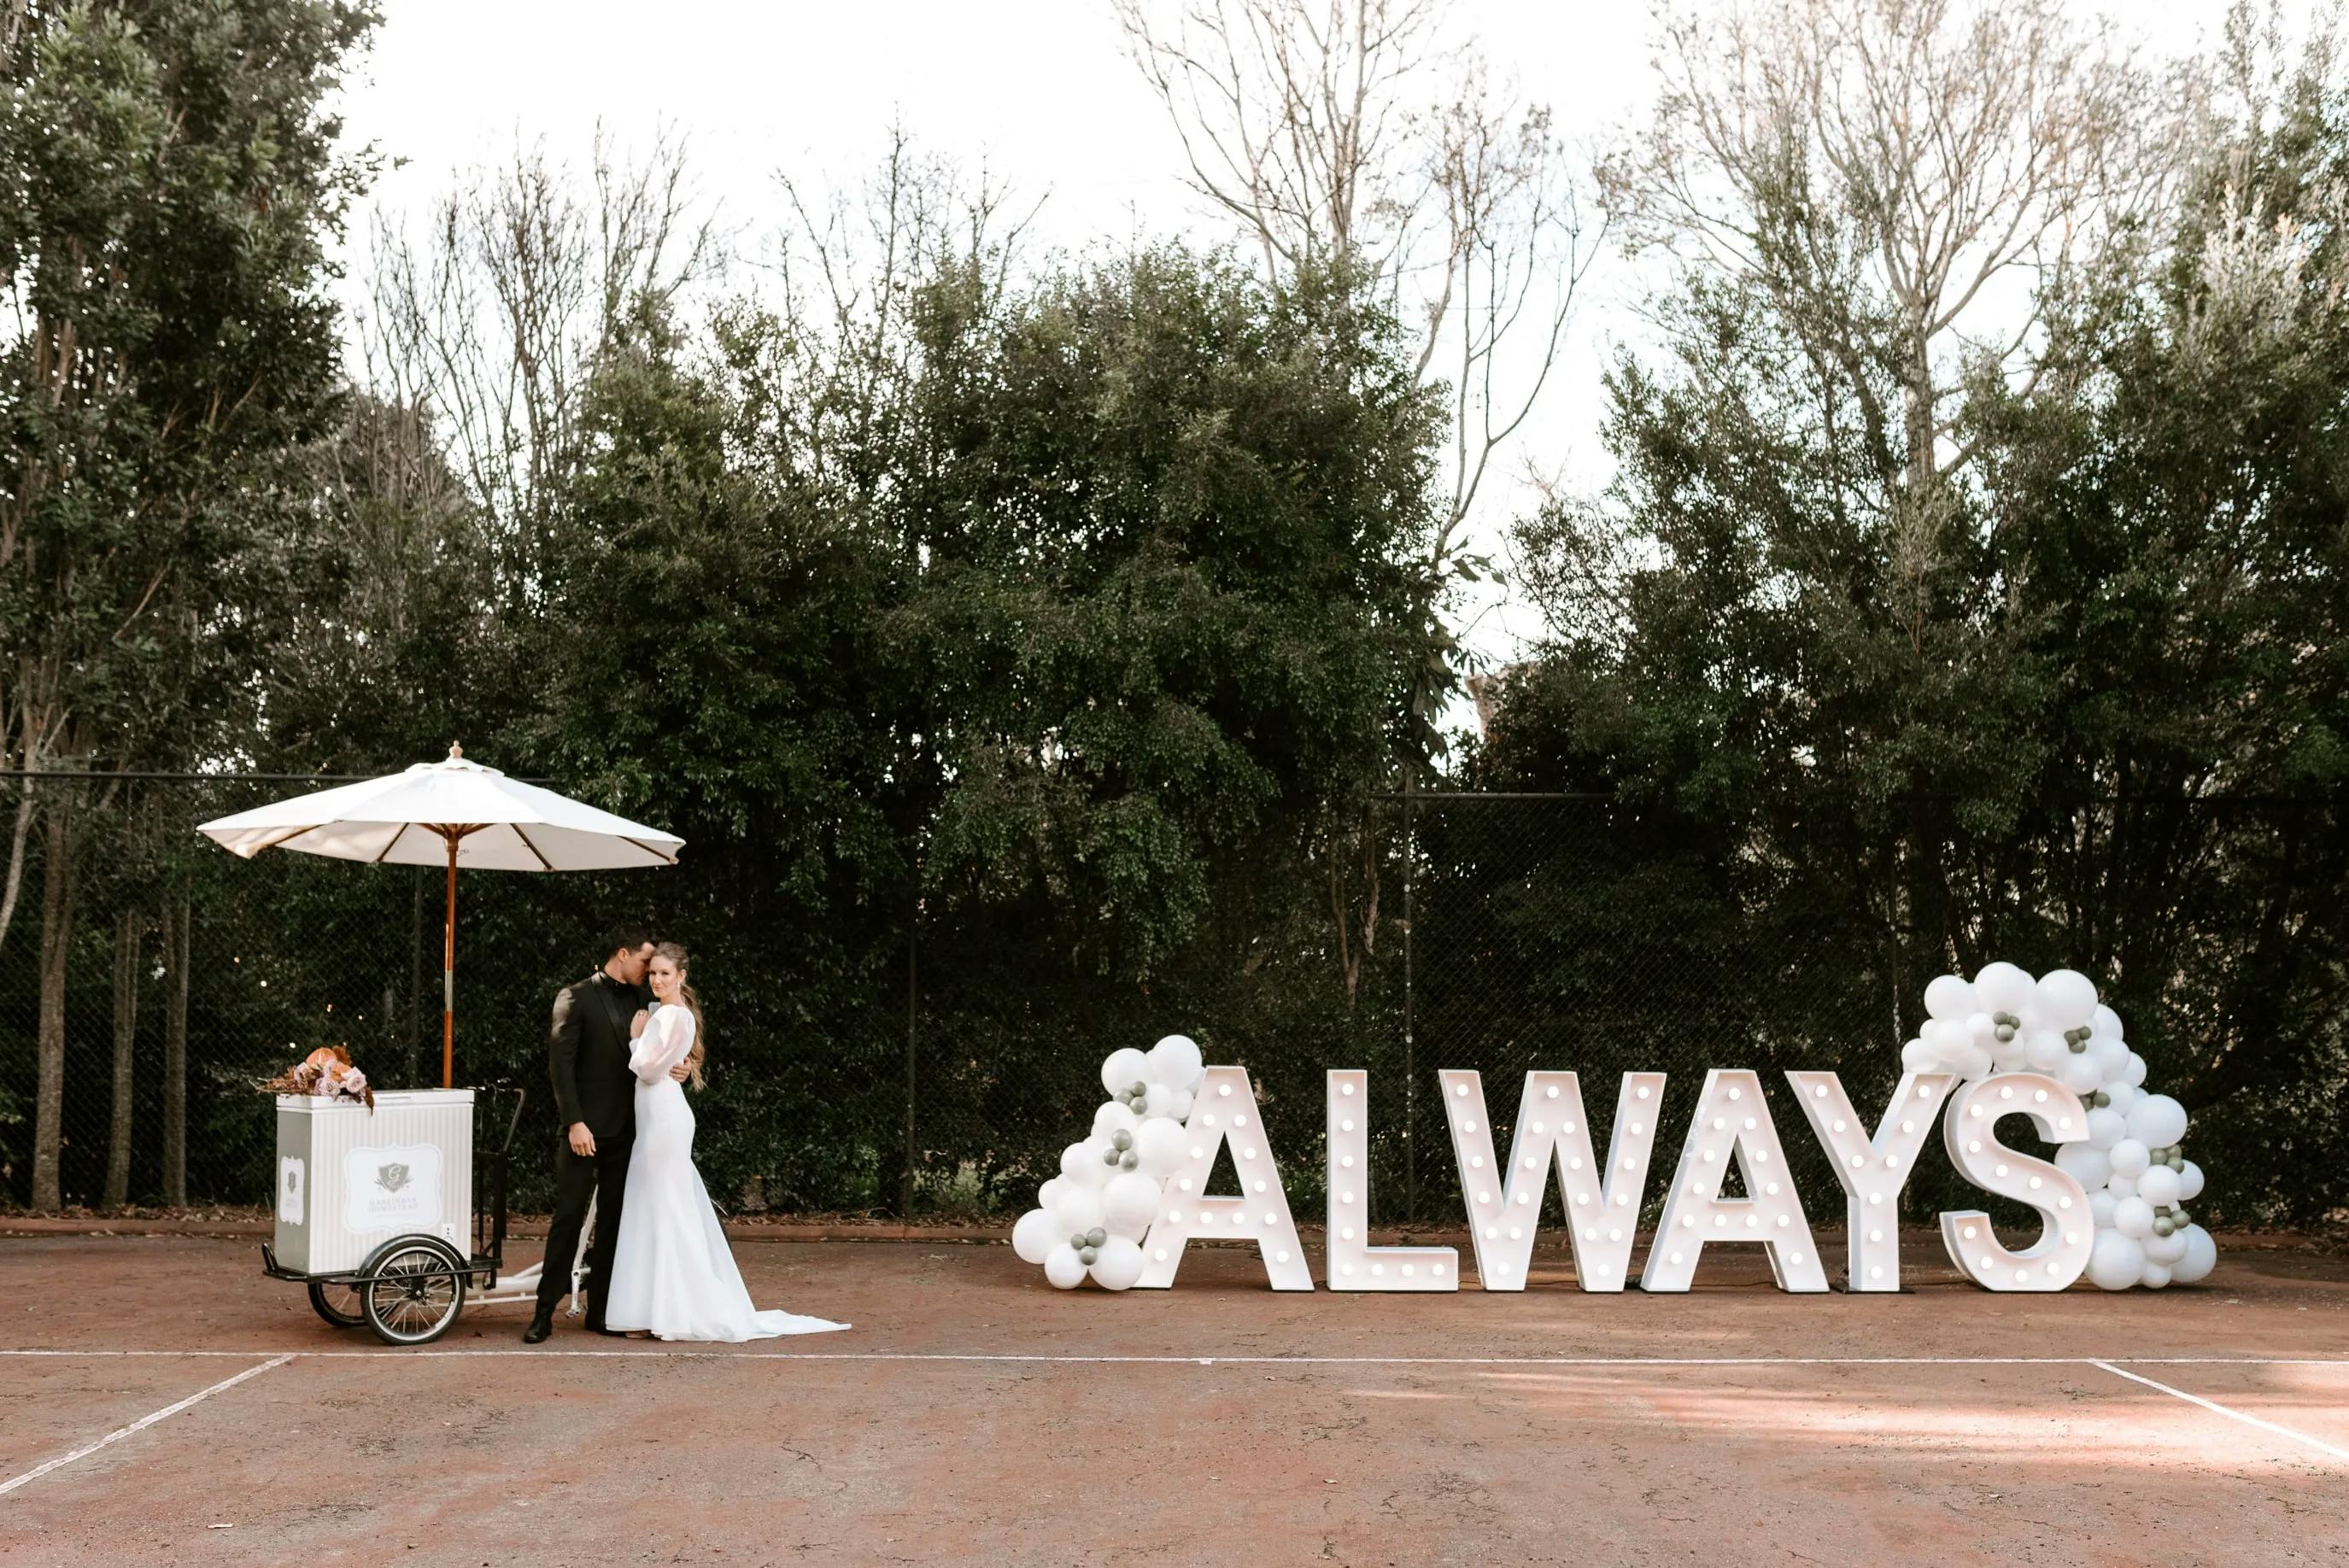 A bride and groom share a kiss next to a decorated ice cream cart with a white umbrella. Large illuminated letters spell out "ALWAYS," decorated with white balloons and flowers, set against a backdrop of trees.